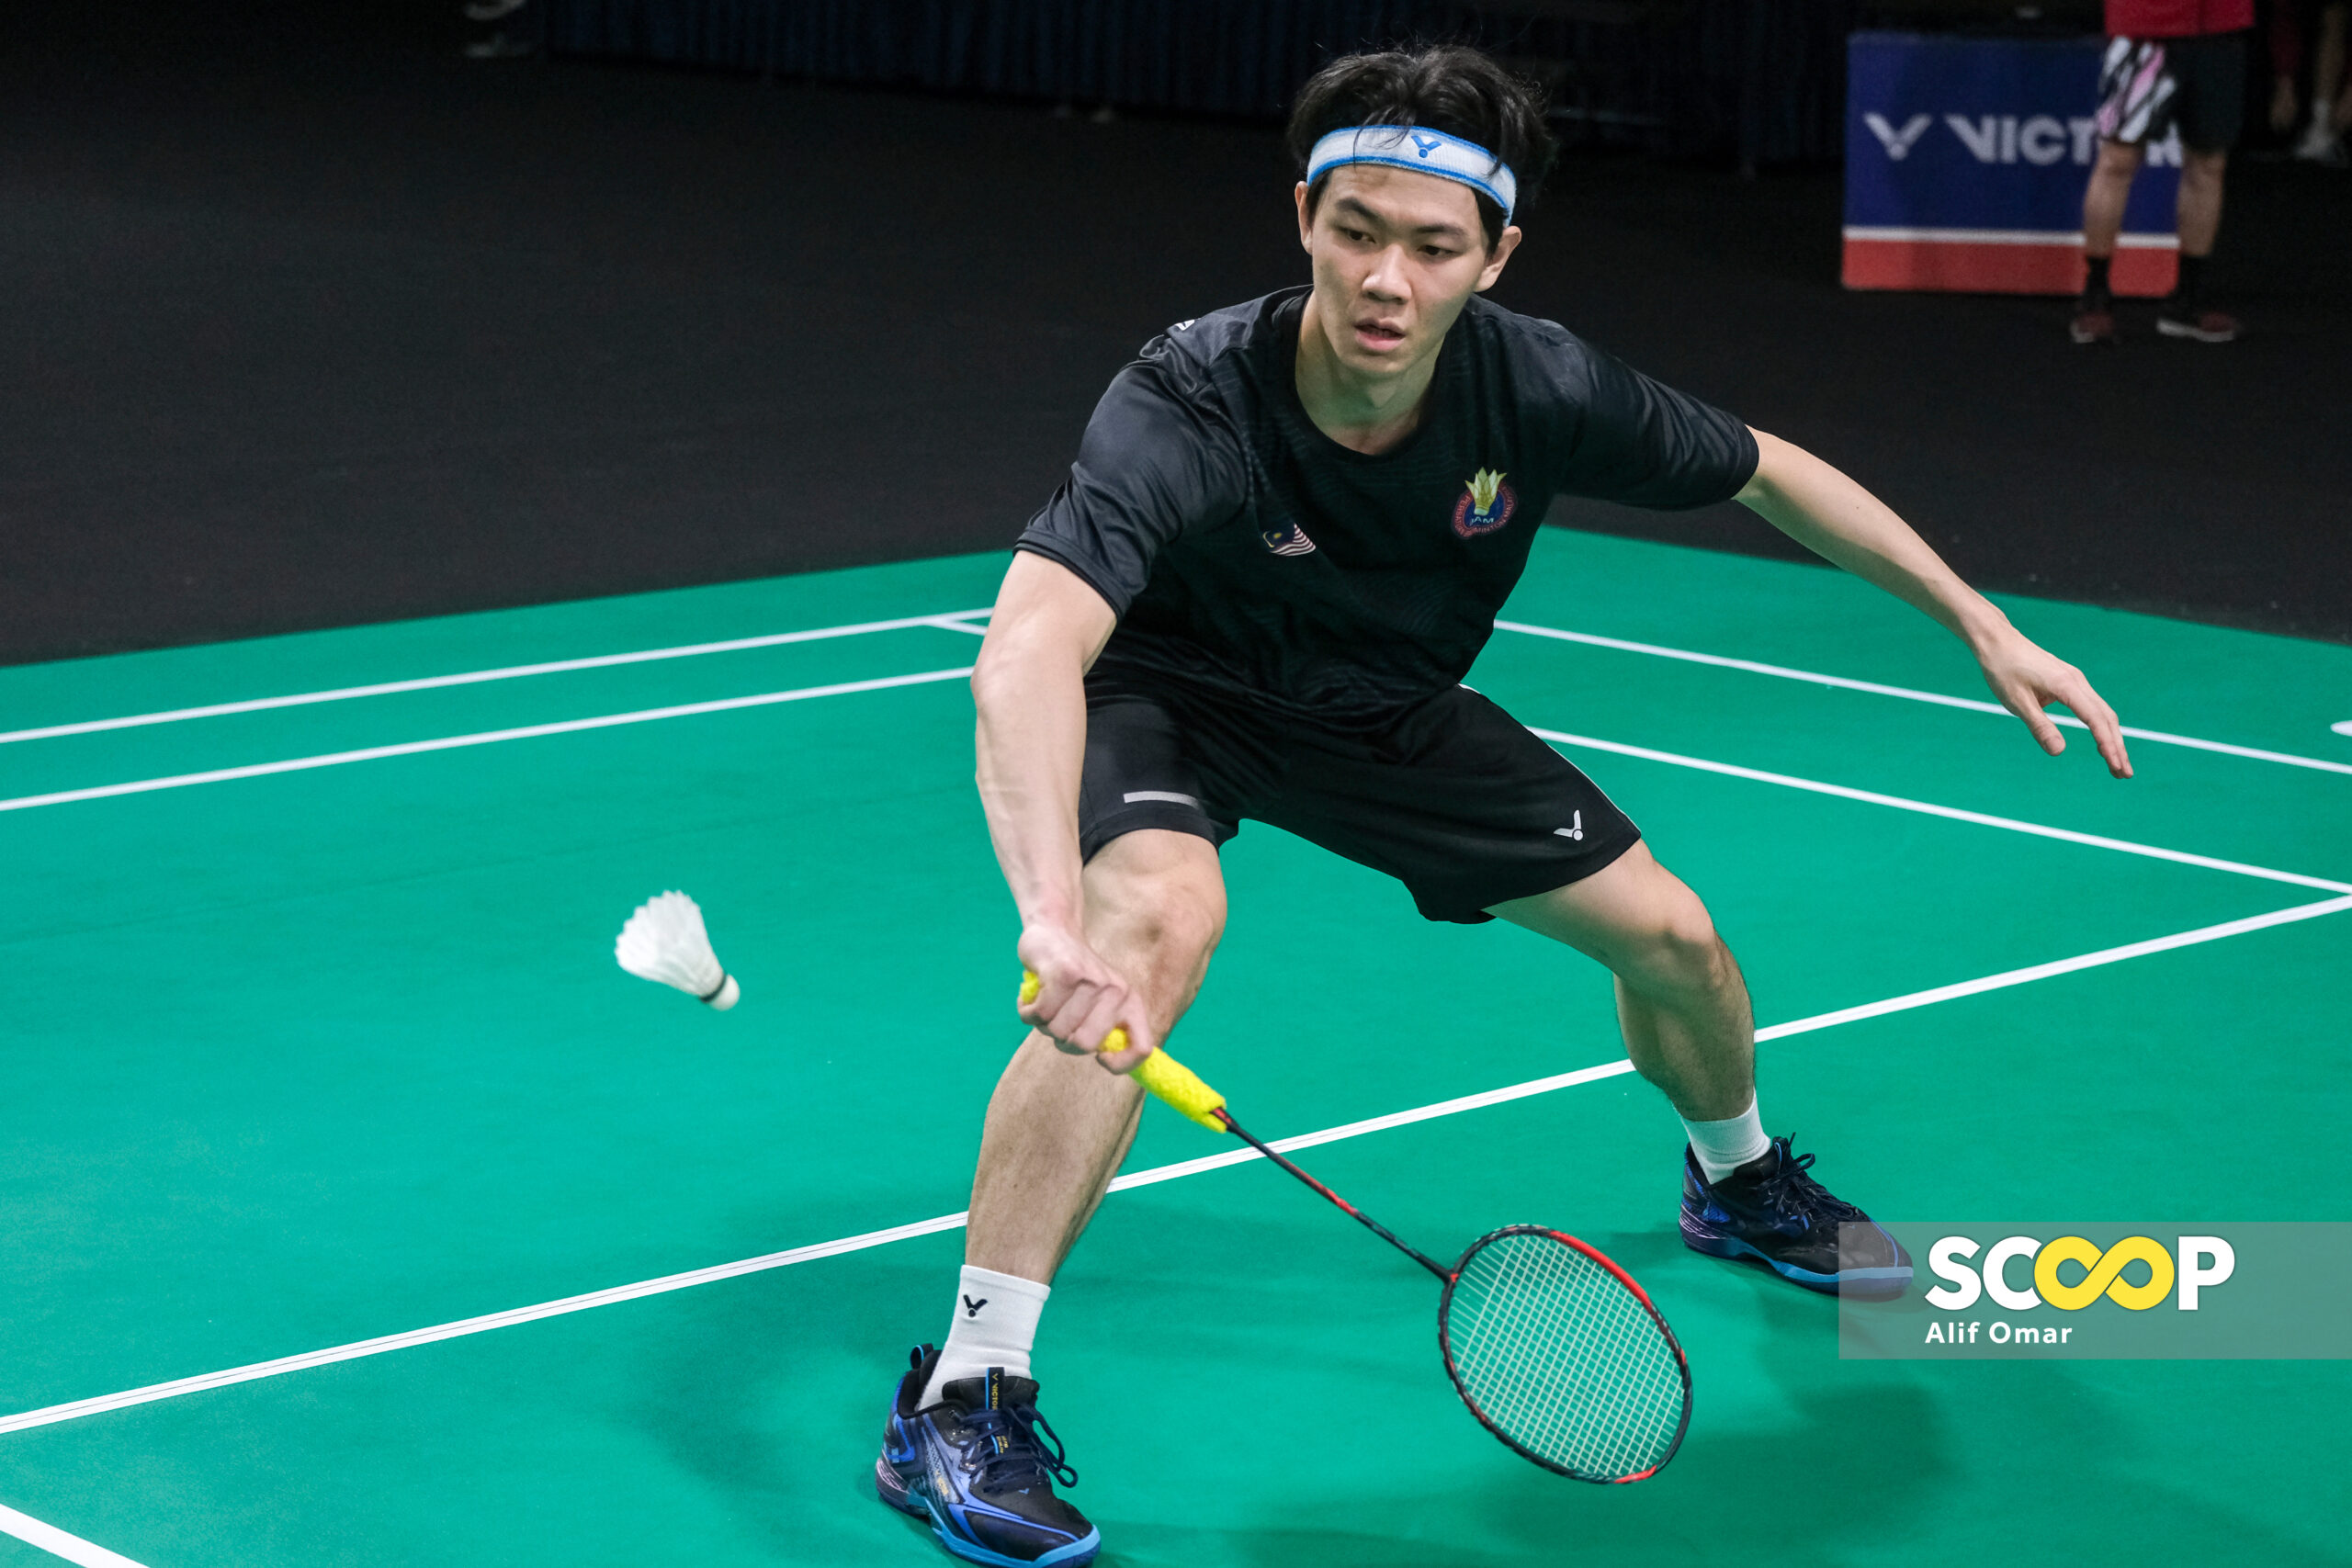 Indonesia Open serves as Zii Jia's litmus test before the Paris Olympics